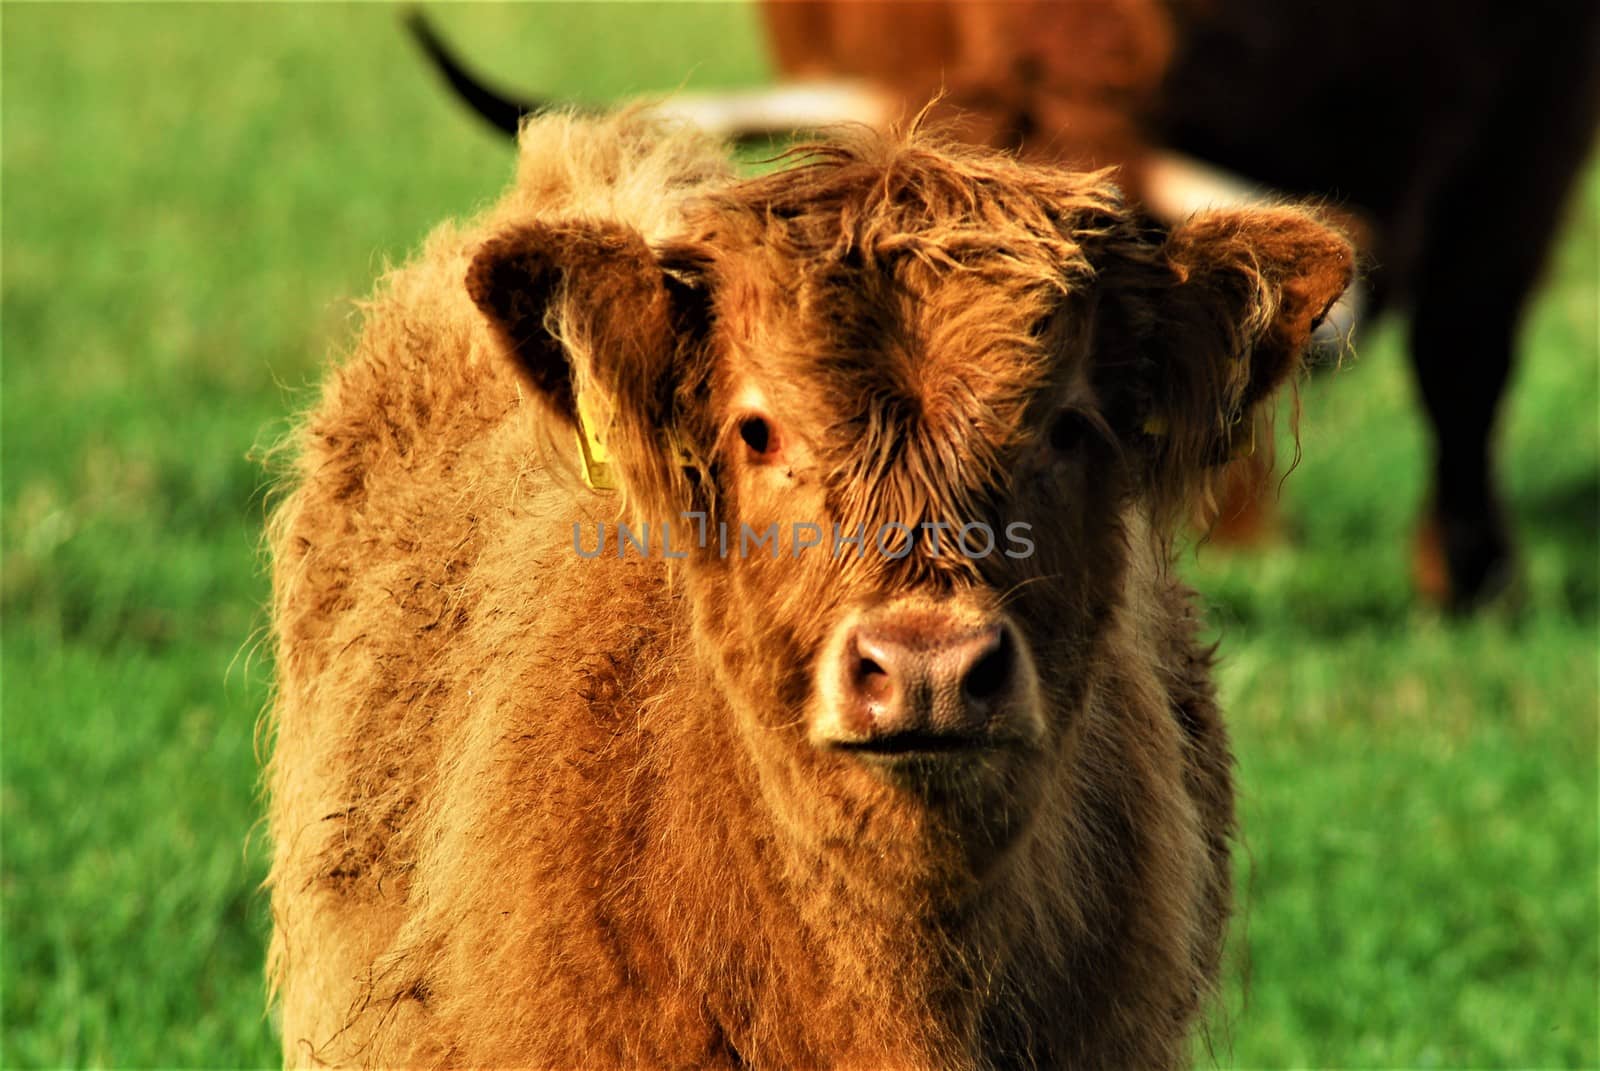 Head of a galloway calf as a portrait by Luise123